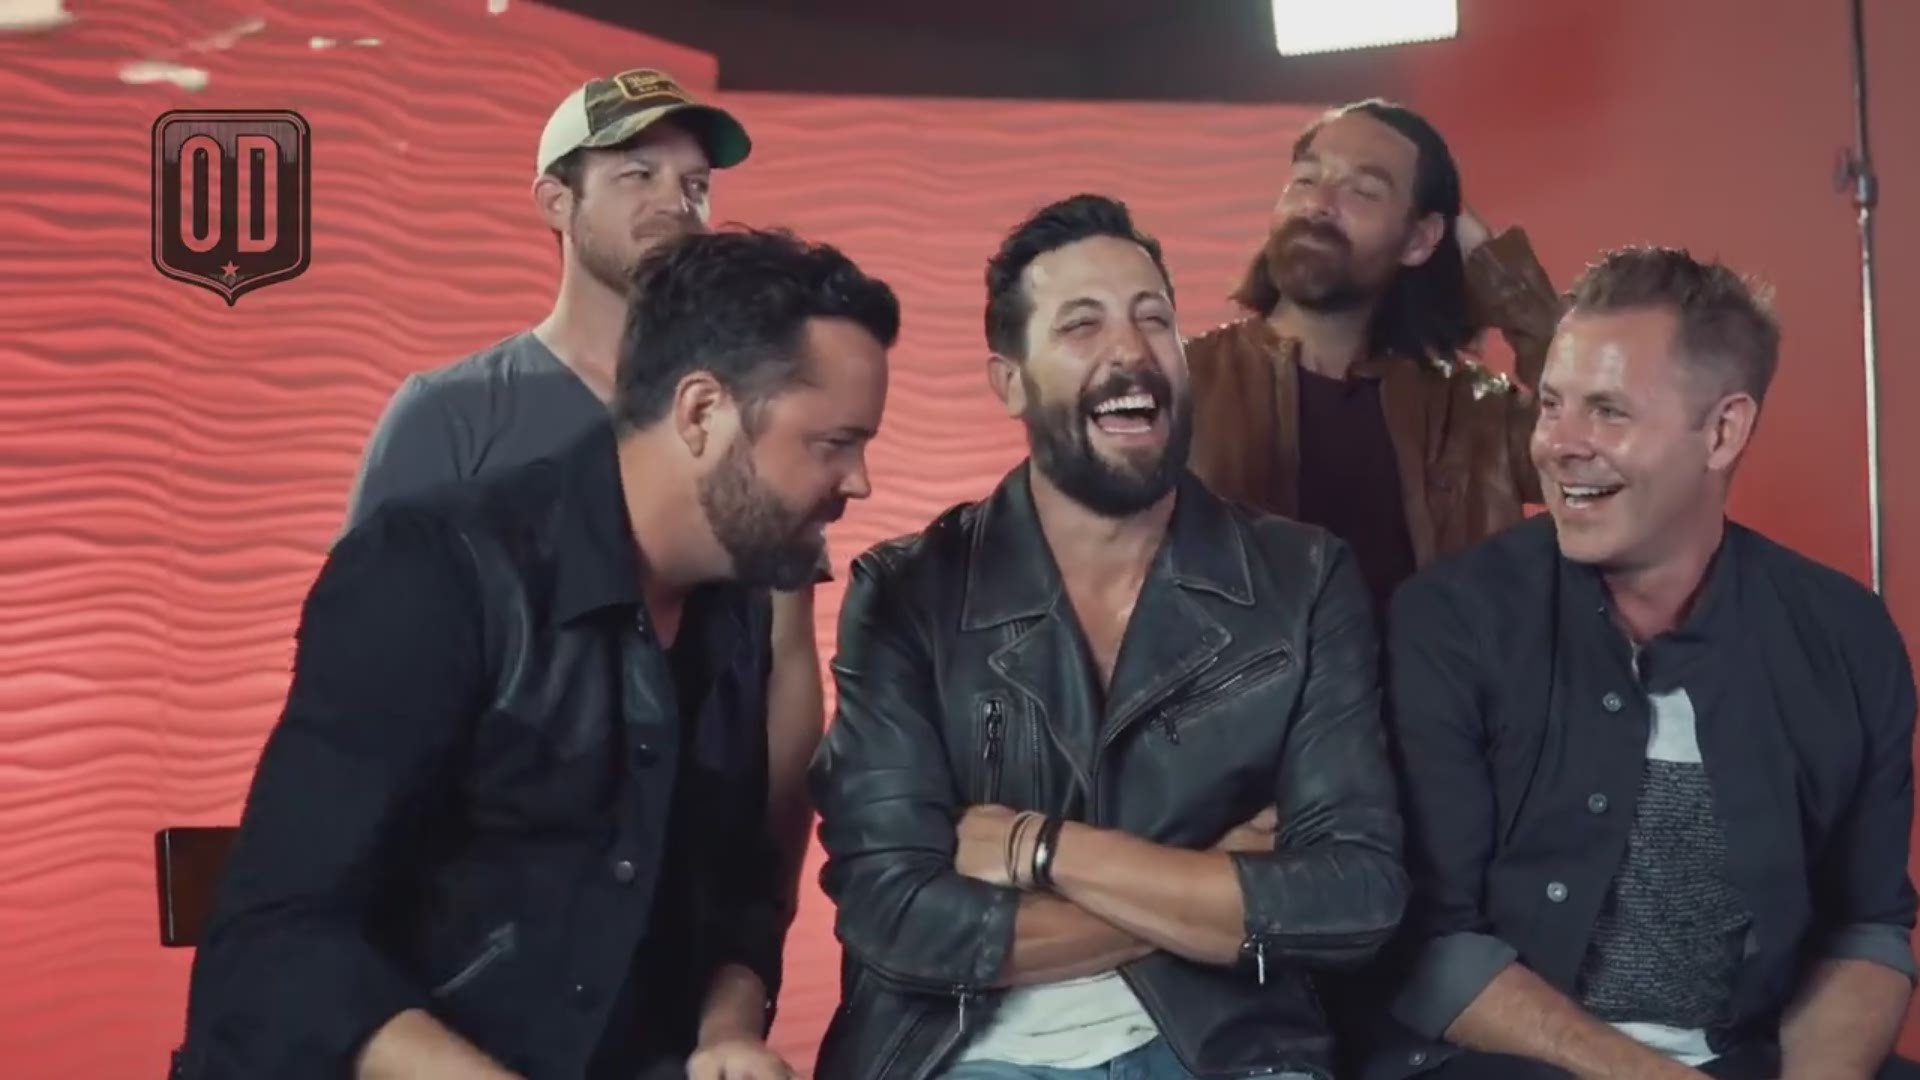 Enter to win 2 tickets to see Old Dominion!